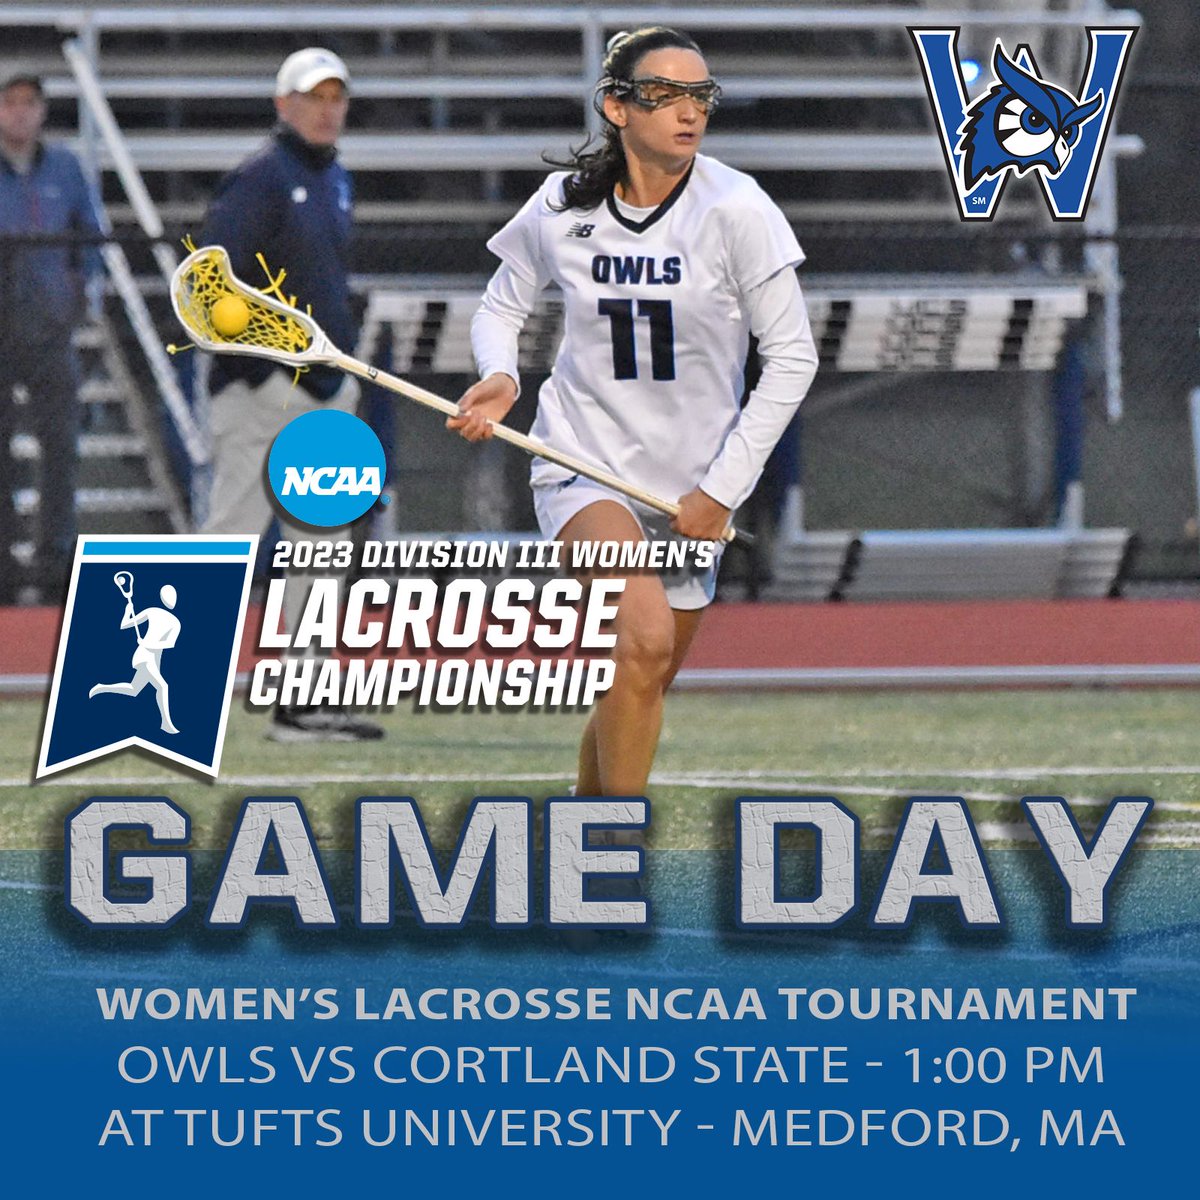 🥍🥍 TOURNAMENT TIME🥍 🥍 Women's lacrosse prepares to embark on their sixth NCAA Tournament appearance as the Owls take on Cortland State in a first round game at 1:00 P.M. from Tufts University! Video, live stats, and tournament coverage at WestfieldStateOwls.com #LetsGoOwls